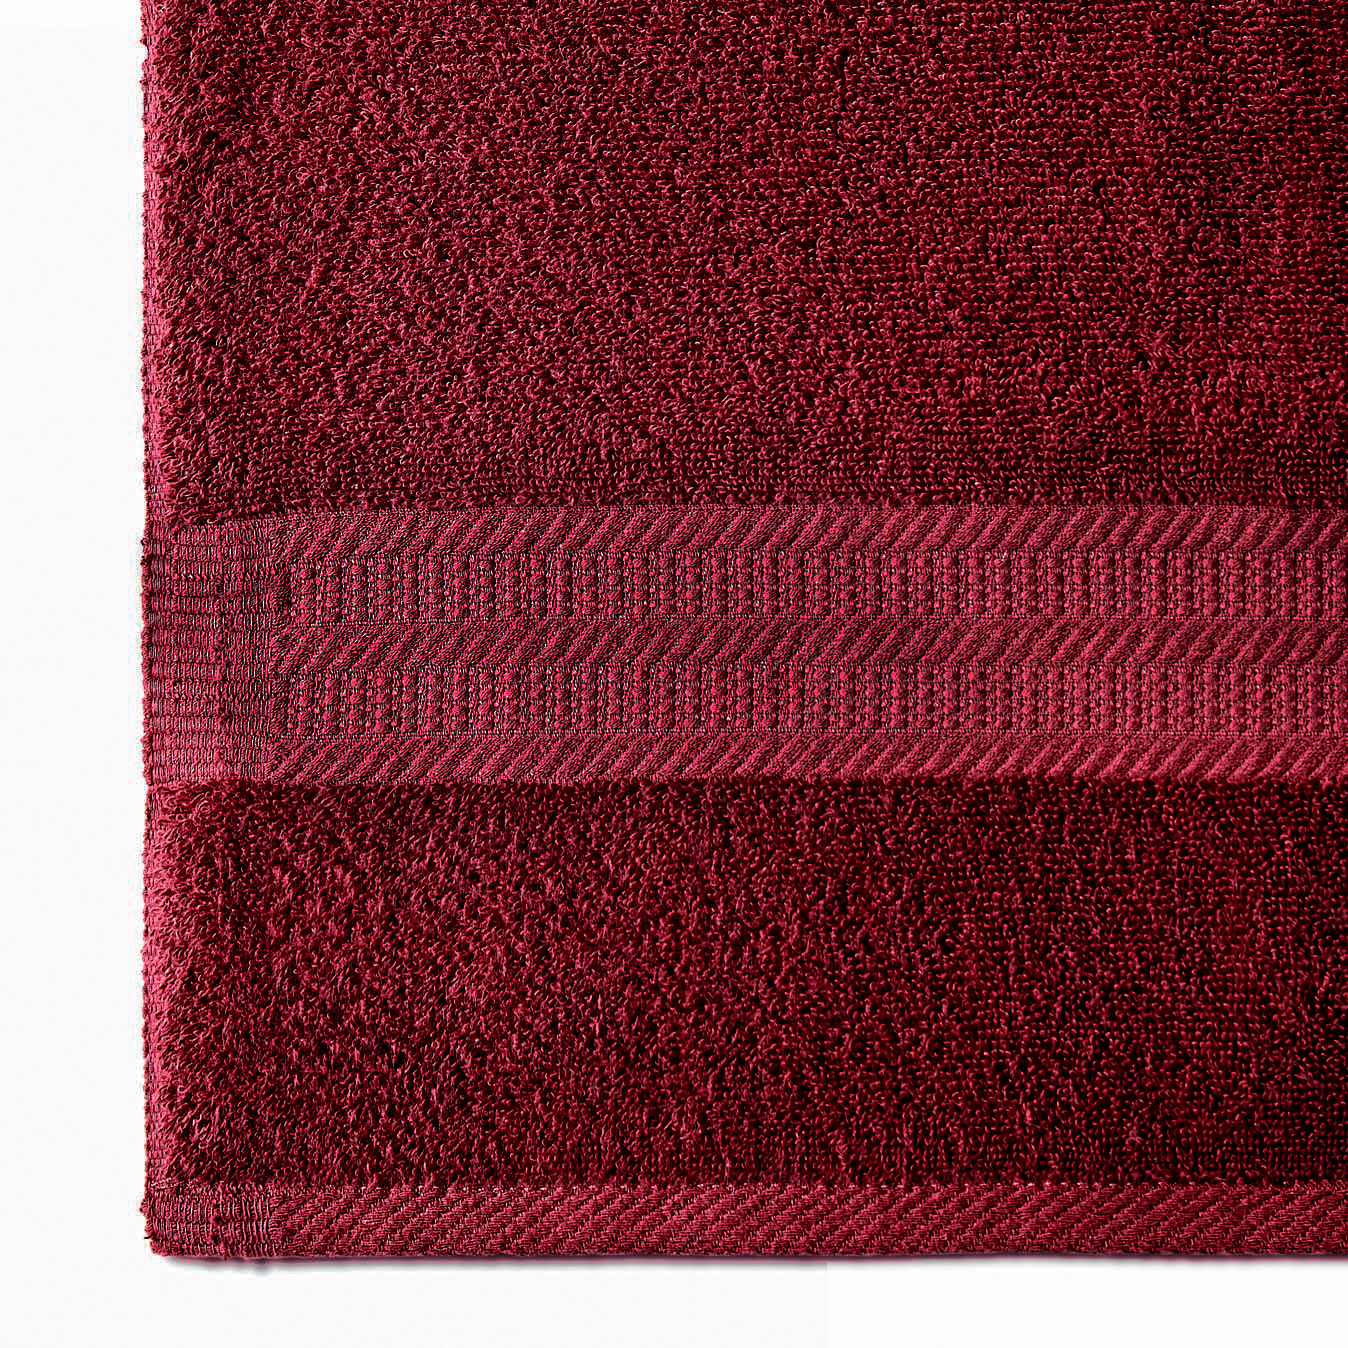 Better Homes & Gardens Adult Hand Towel, Solid Red - image 5 of 7